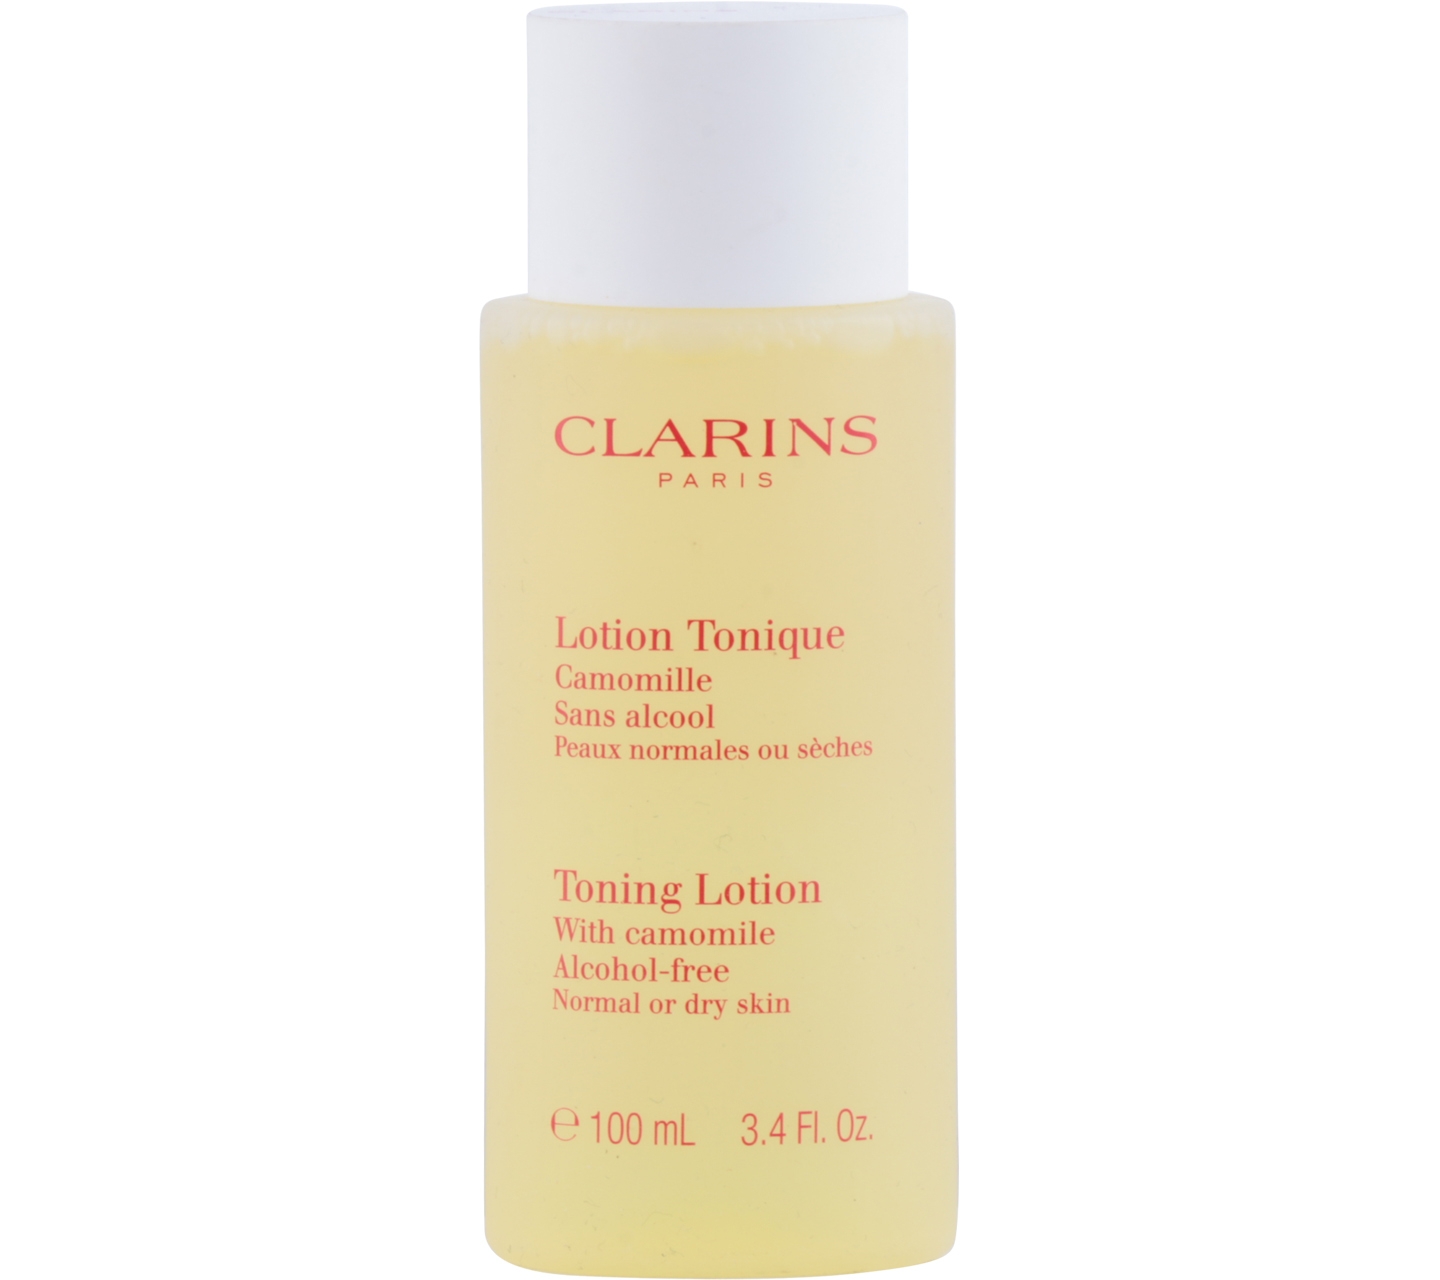 Clarins Toning Lotion with Camomile Skin Care